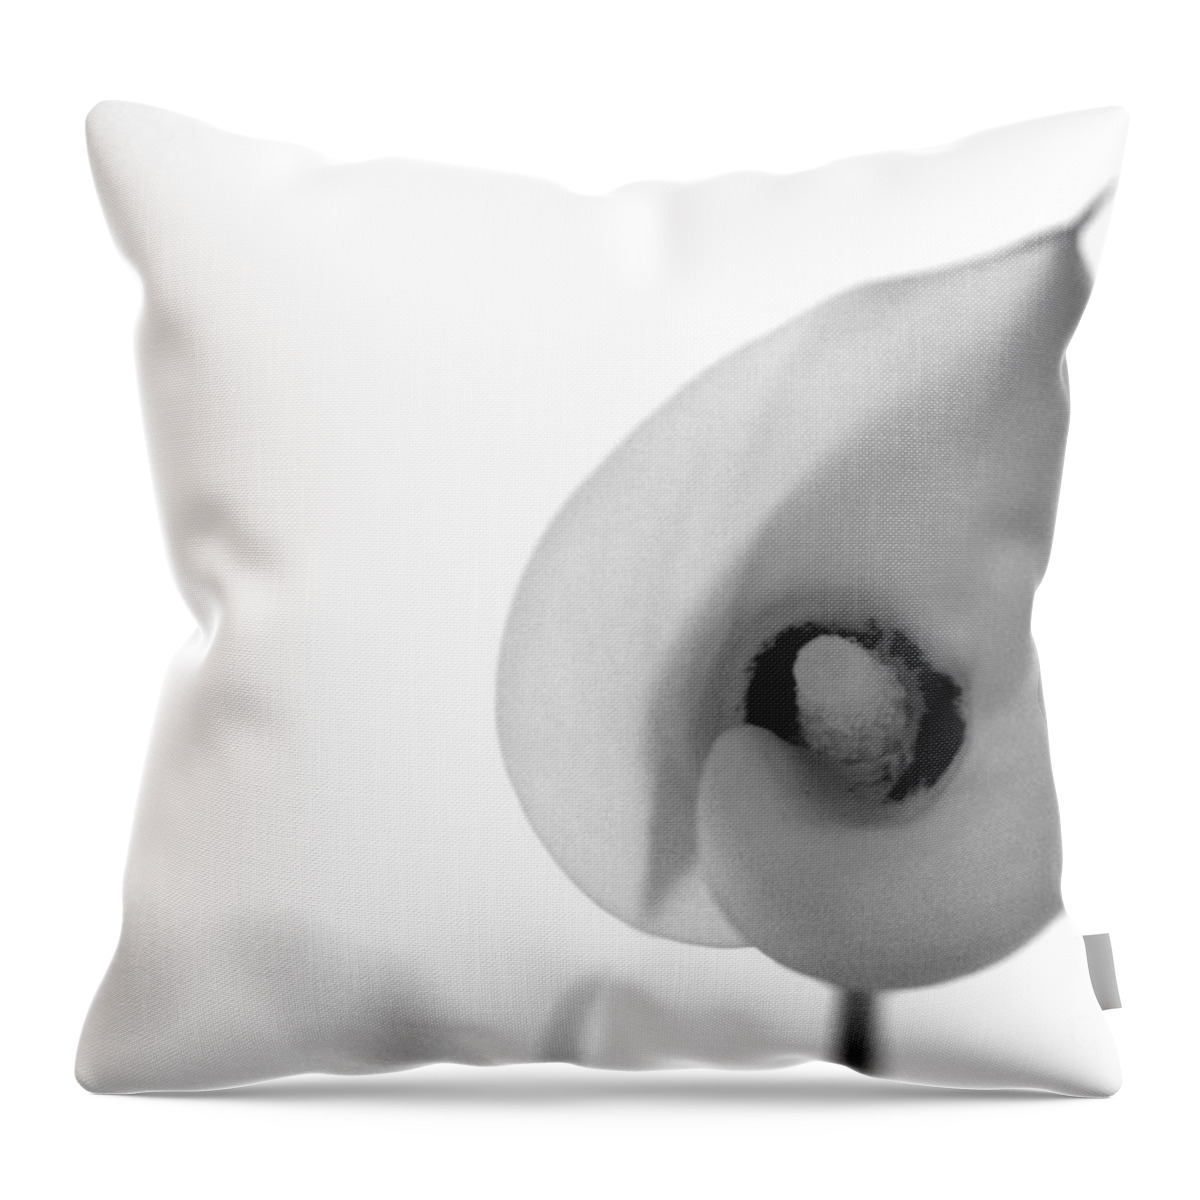 #calalily #nature #flower #interiordesign #floral #photography #fineart #art #images #print #blackandwhite Throw Pillow featuring the photograph Cala Lily by Jacquelinemari